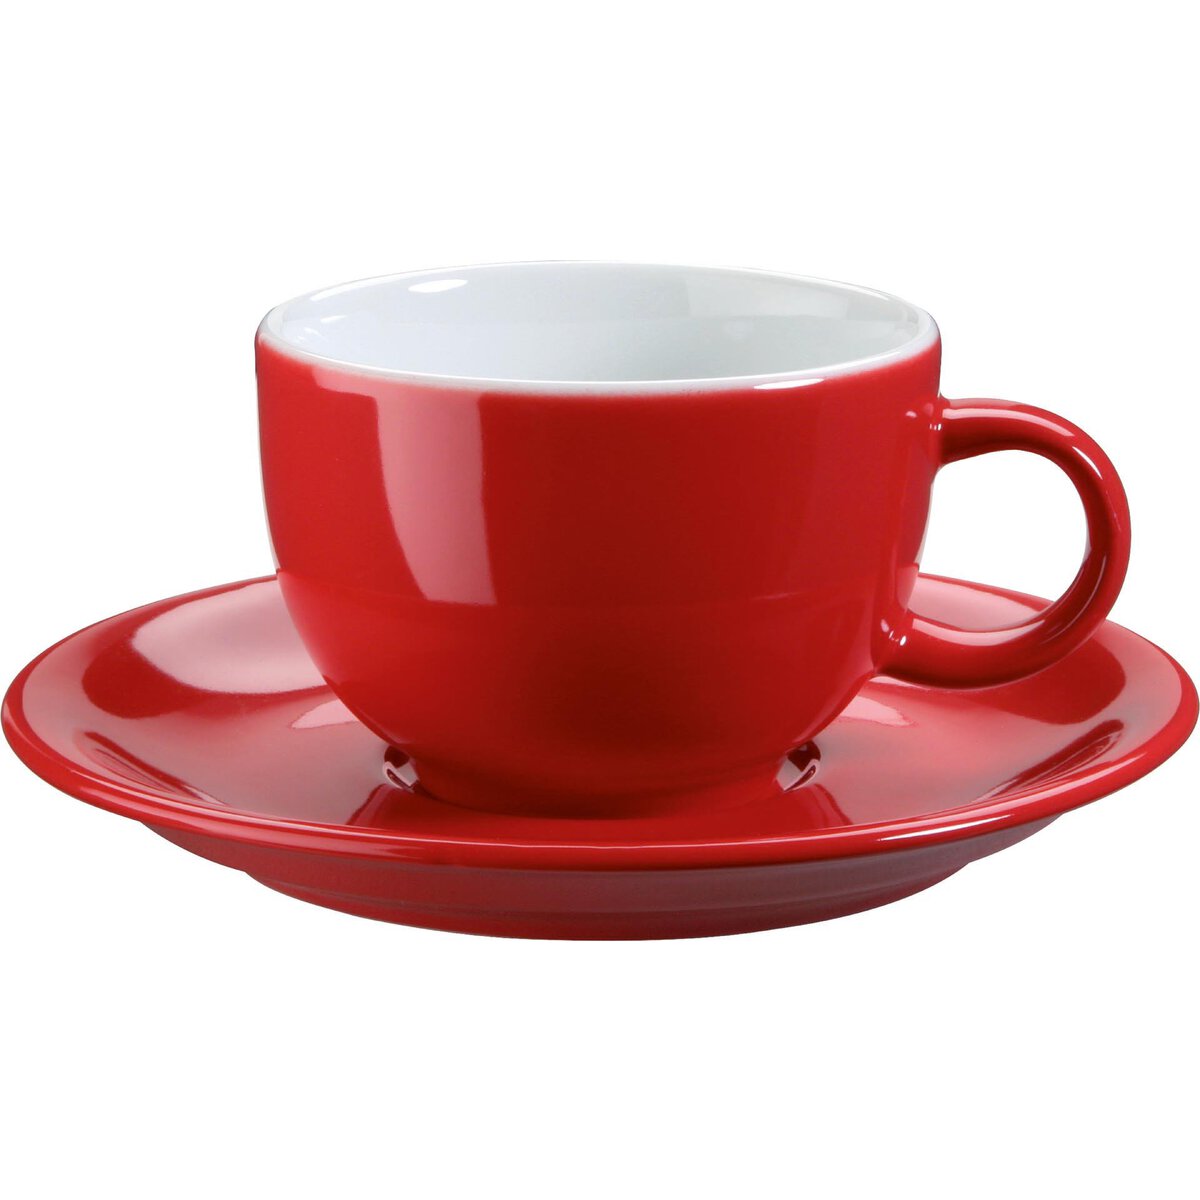 Kaffee-/Cappuccinotasse obere rot (1)